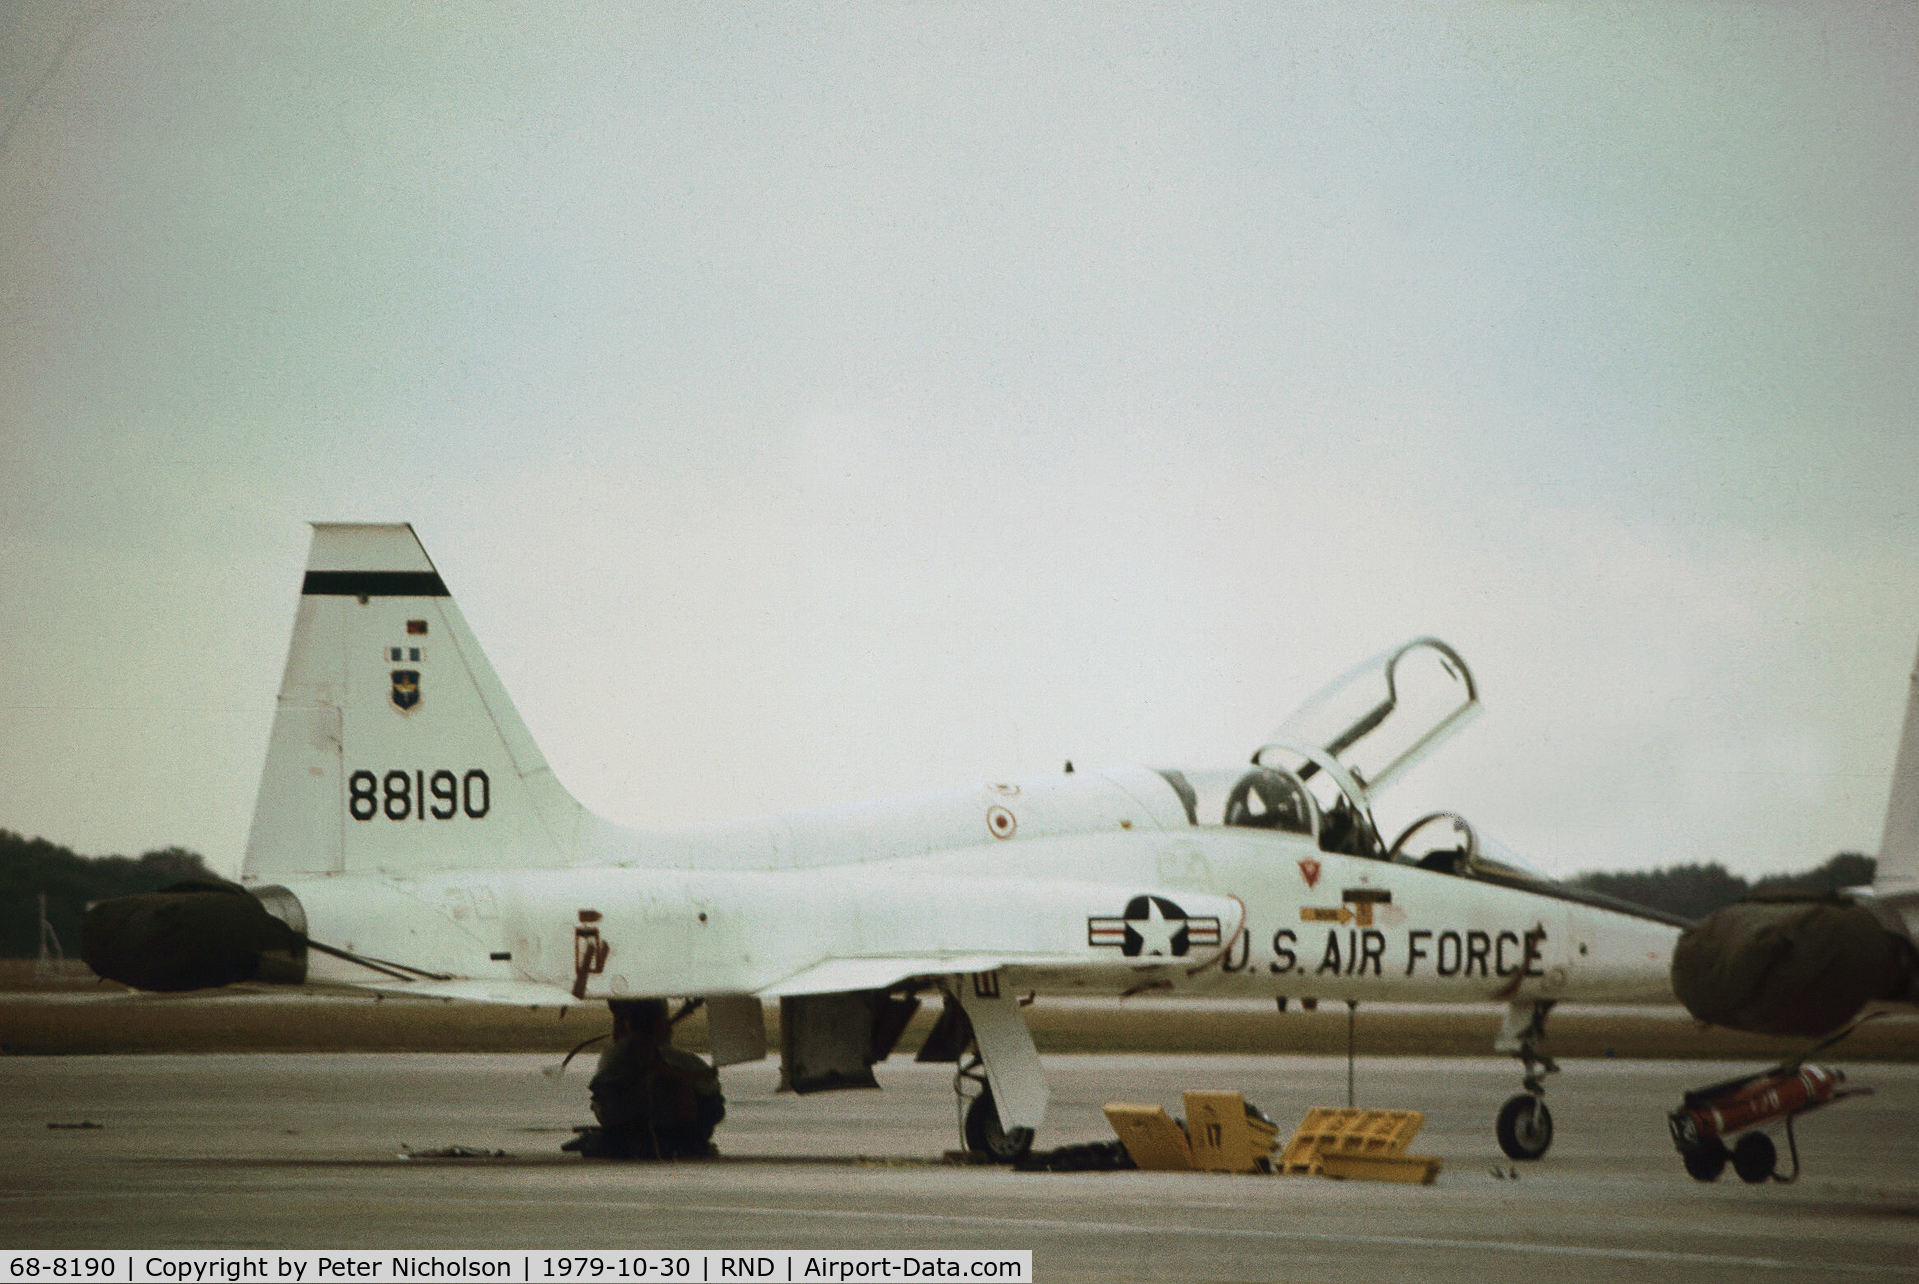 68-8190, 1968 Northrop T-38A-75-NO Talon C/N T.6195, T-38A Talon of the 12th Flying Training Wing on the flight-line at Randolph AFB in November 1979.